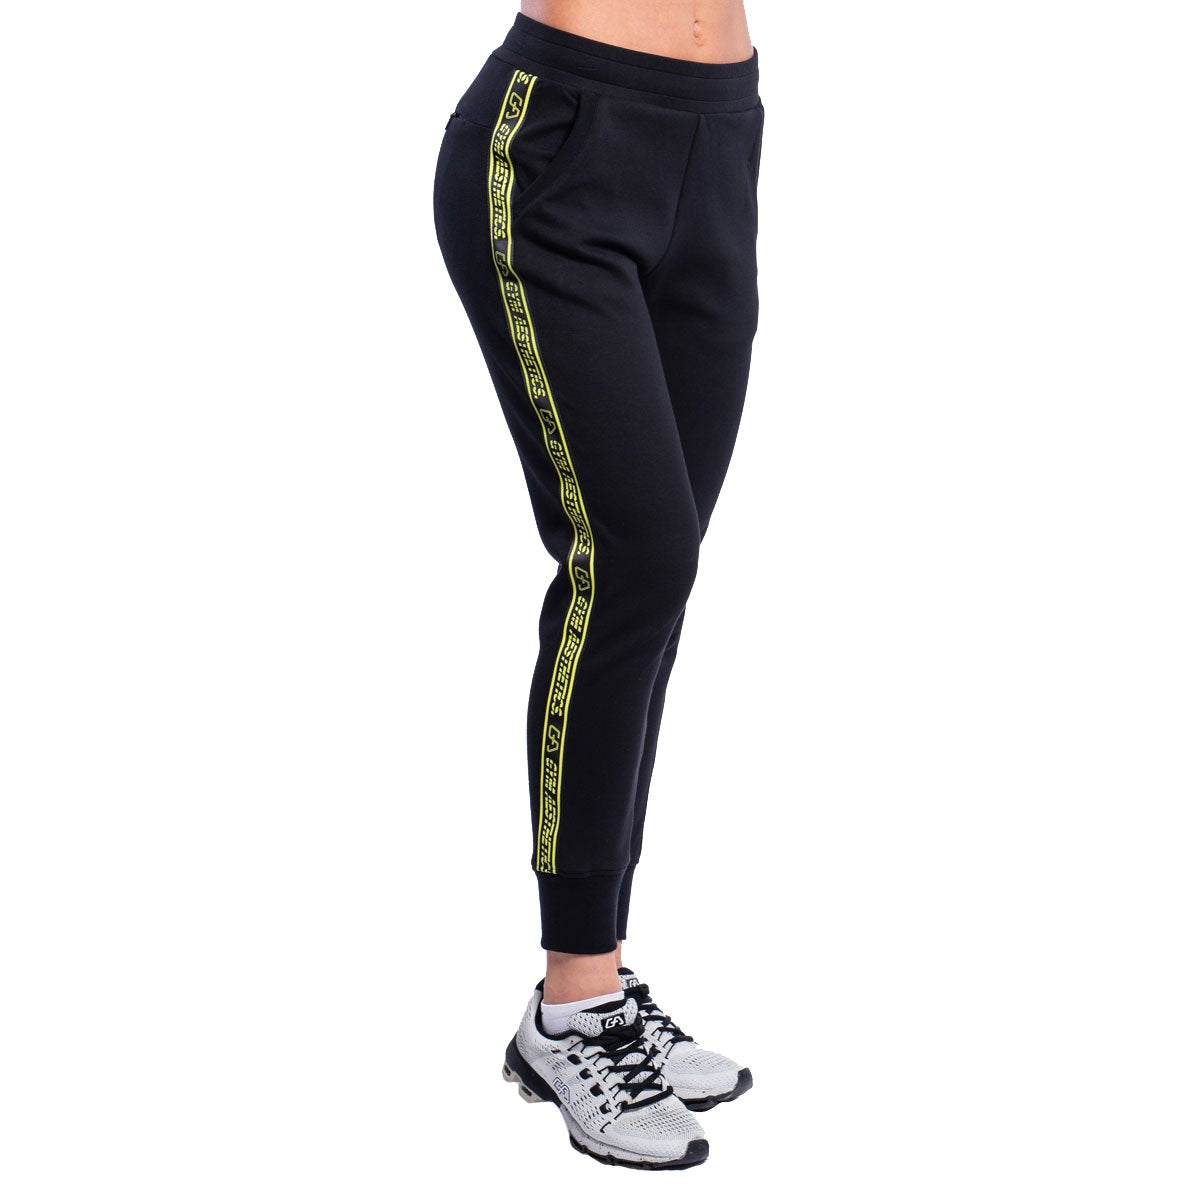 High Waist Tapered Yoga Running Leggings With Pockets With Pockets For Women  Perfect For Running, Gym, And Track Workouts From Yoganiceonline, $27.22 |  DHgate.Com